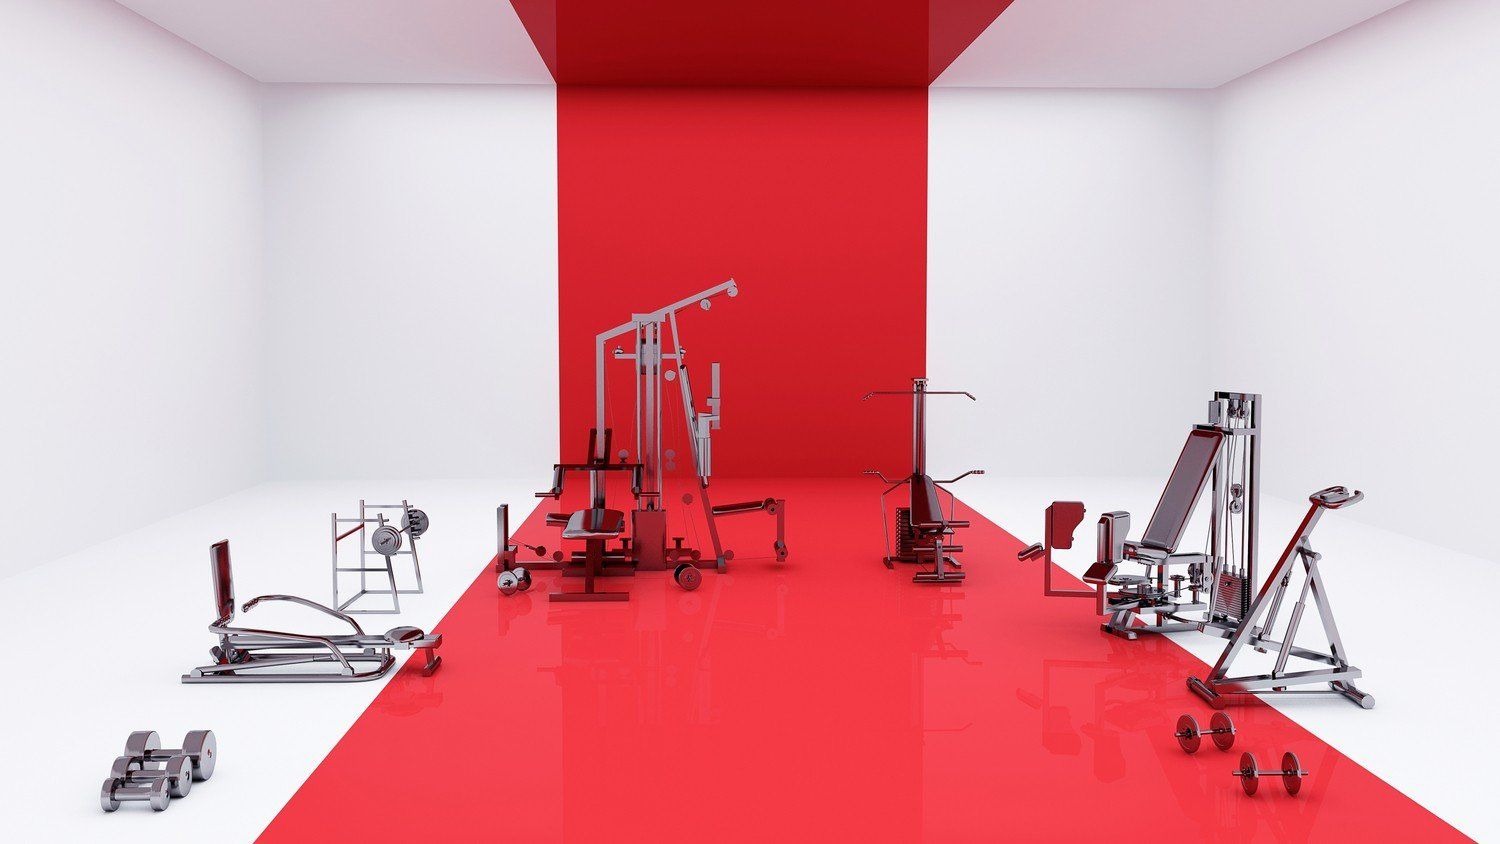 A gym equipment machines with a red and white striped wall and a red carpet.